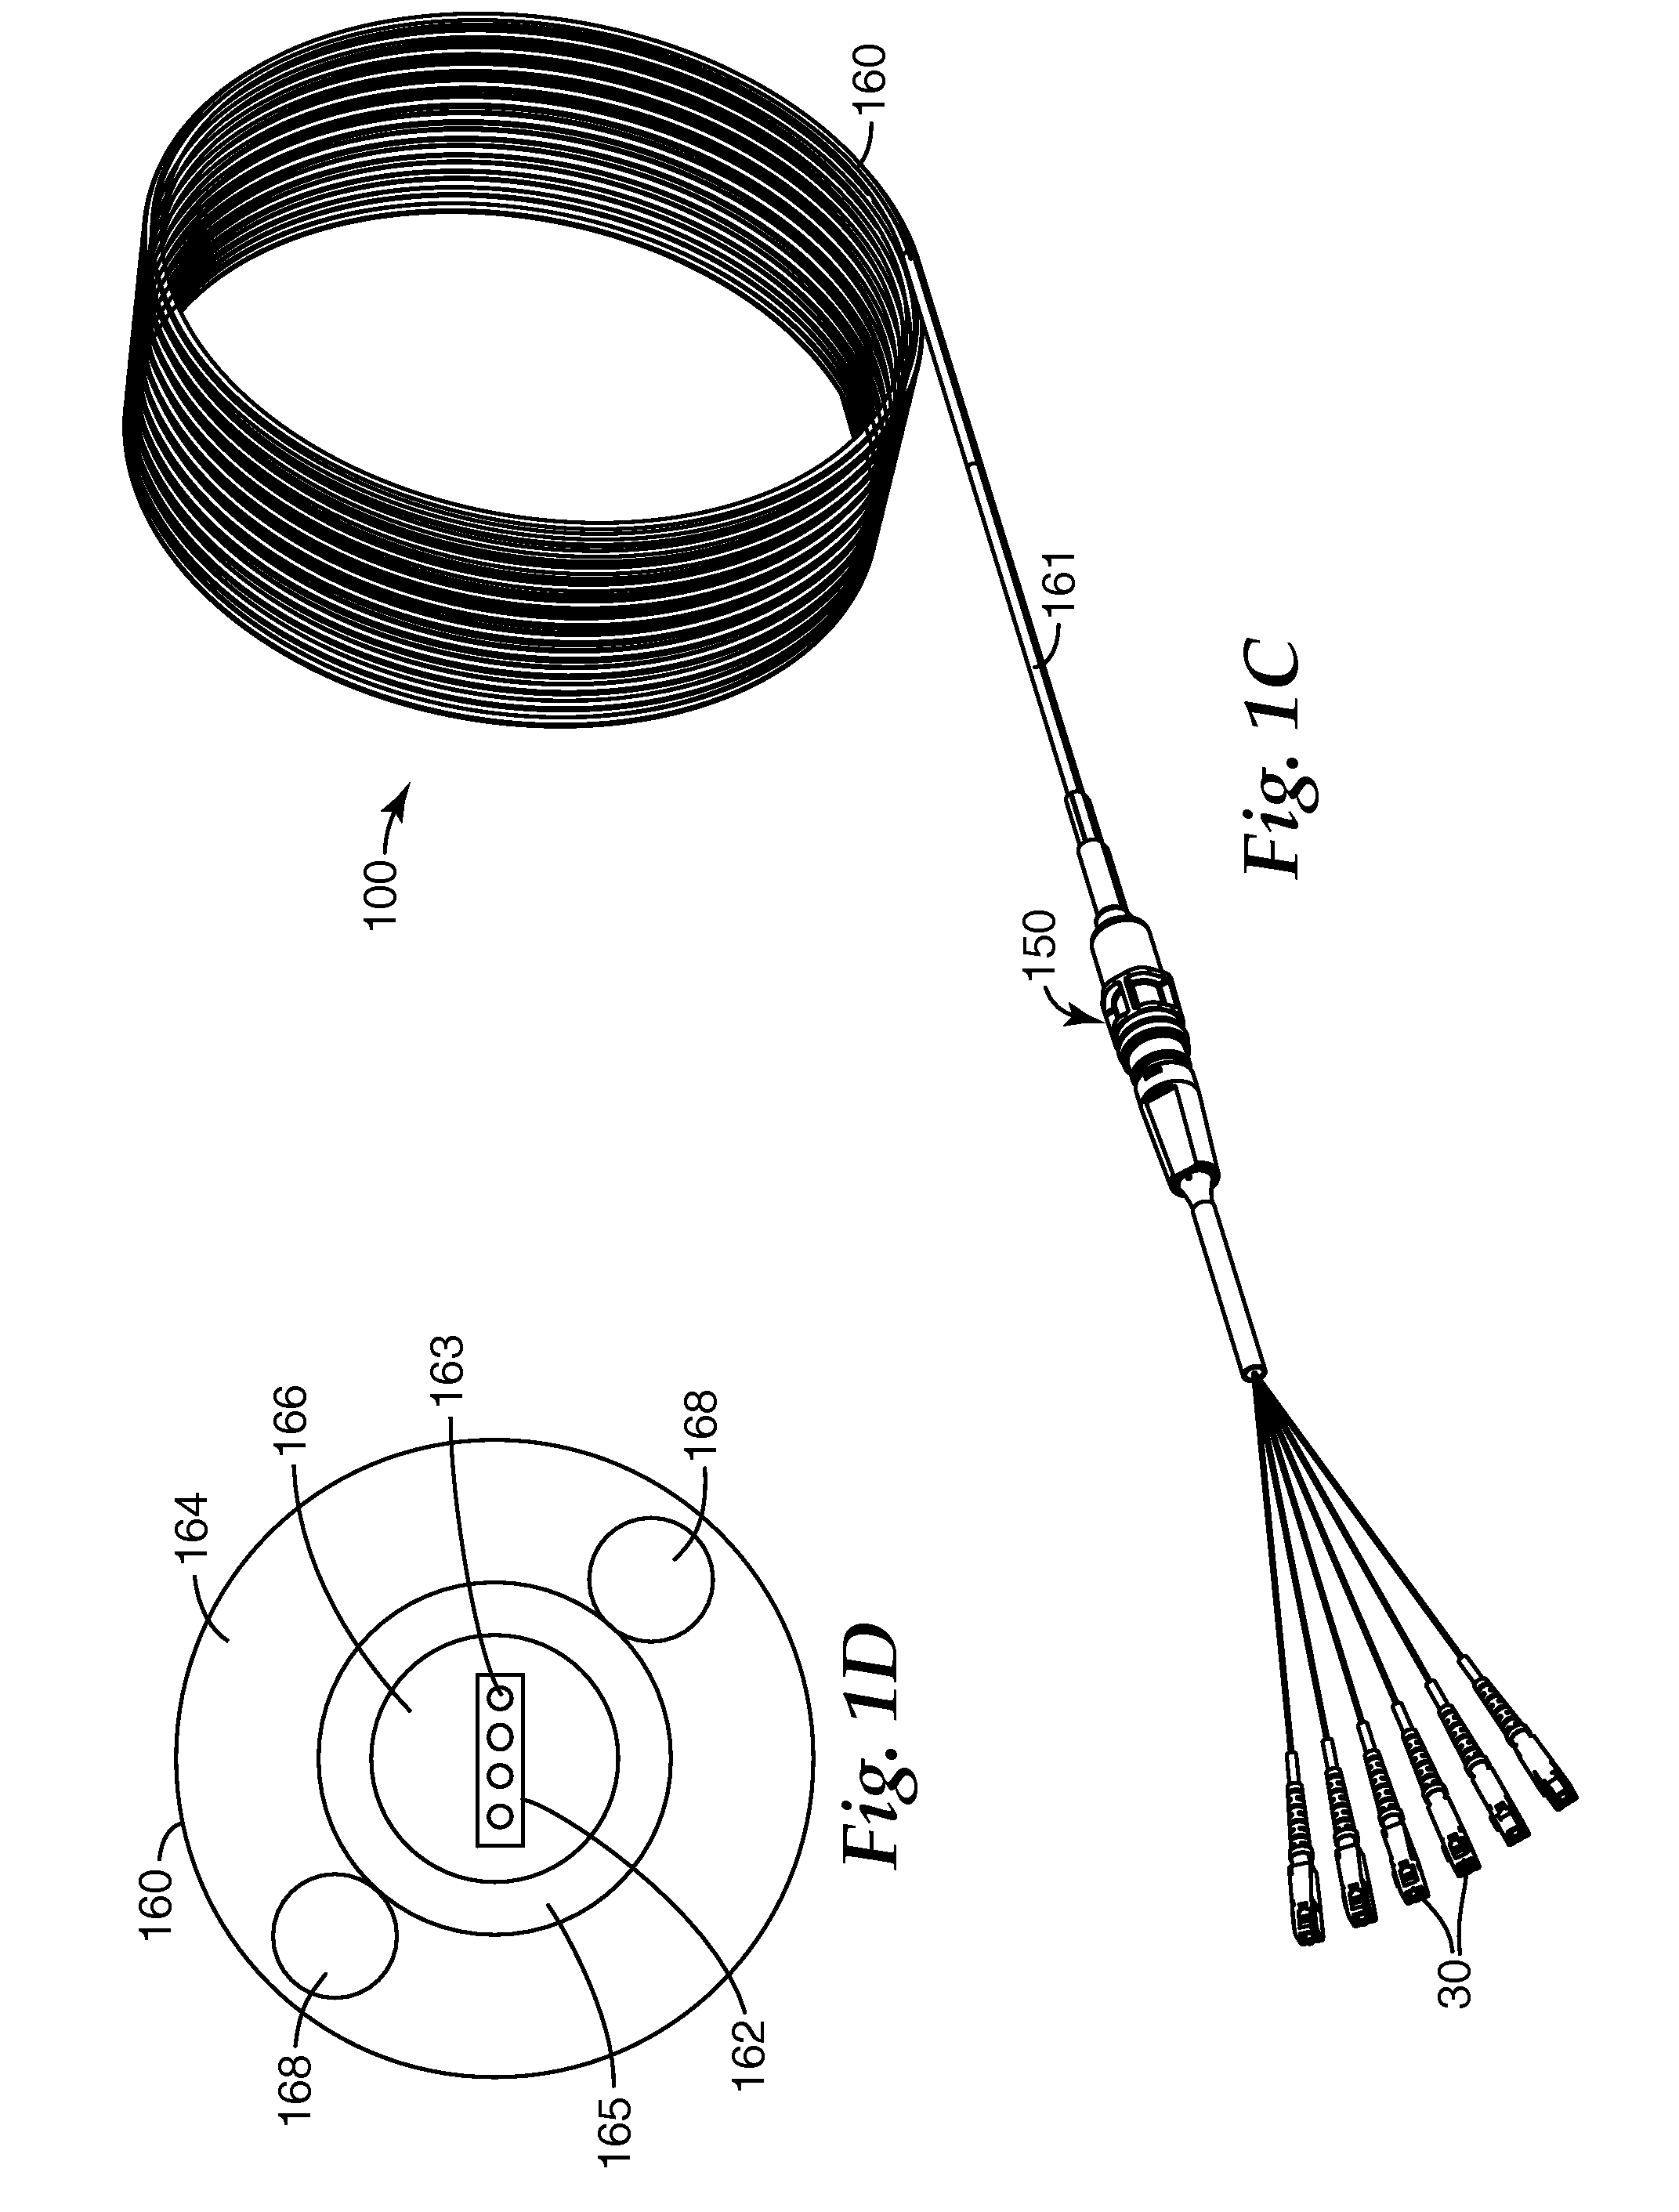 Optical fiber cable inlet device and telecommunications enclosure system